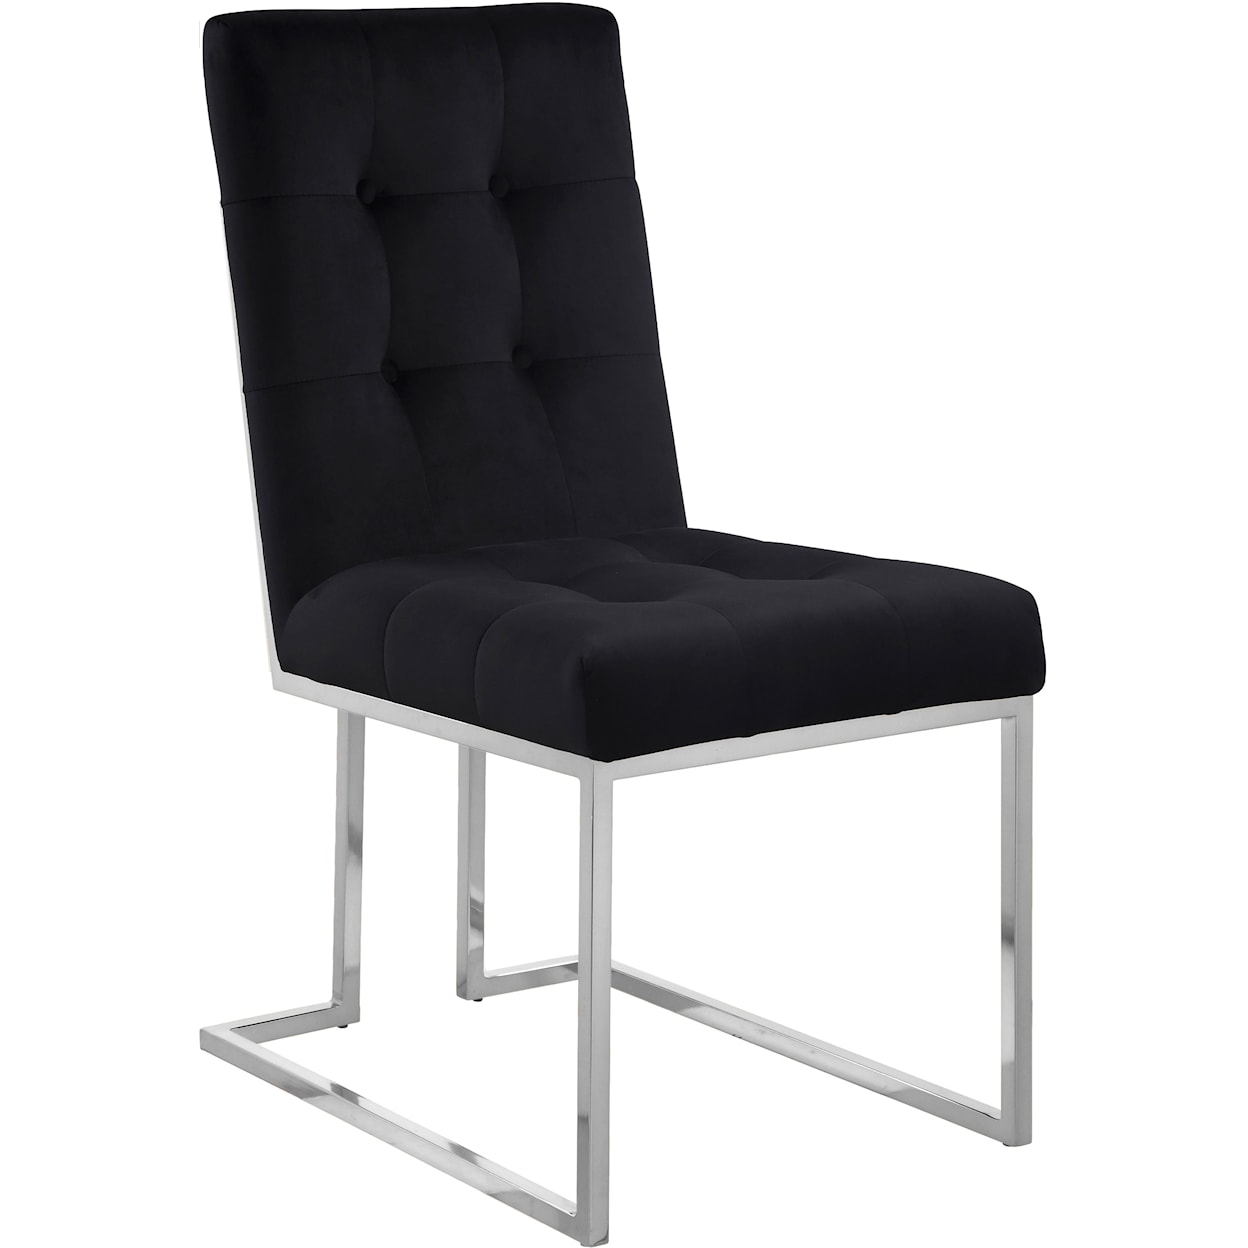 Meridian Furniture Alexis Dining Chair